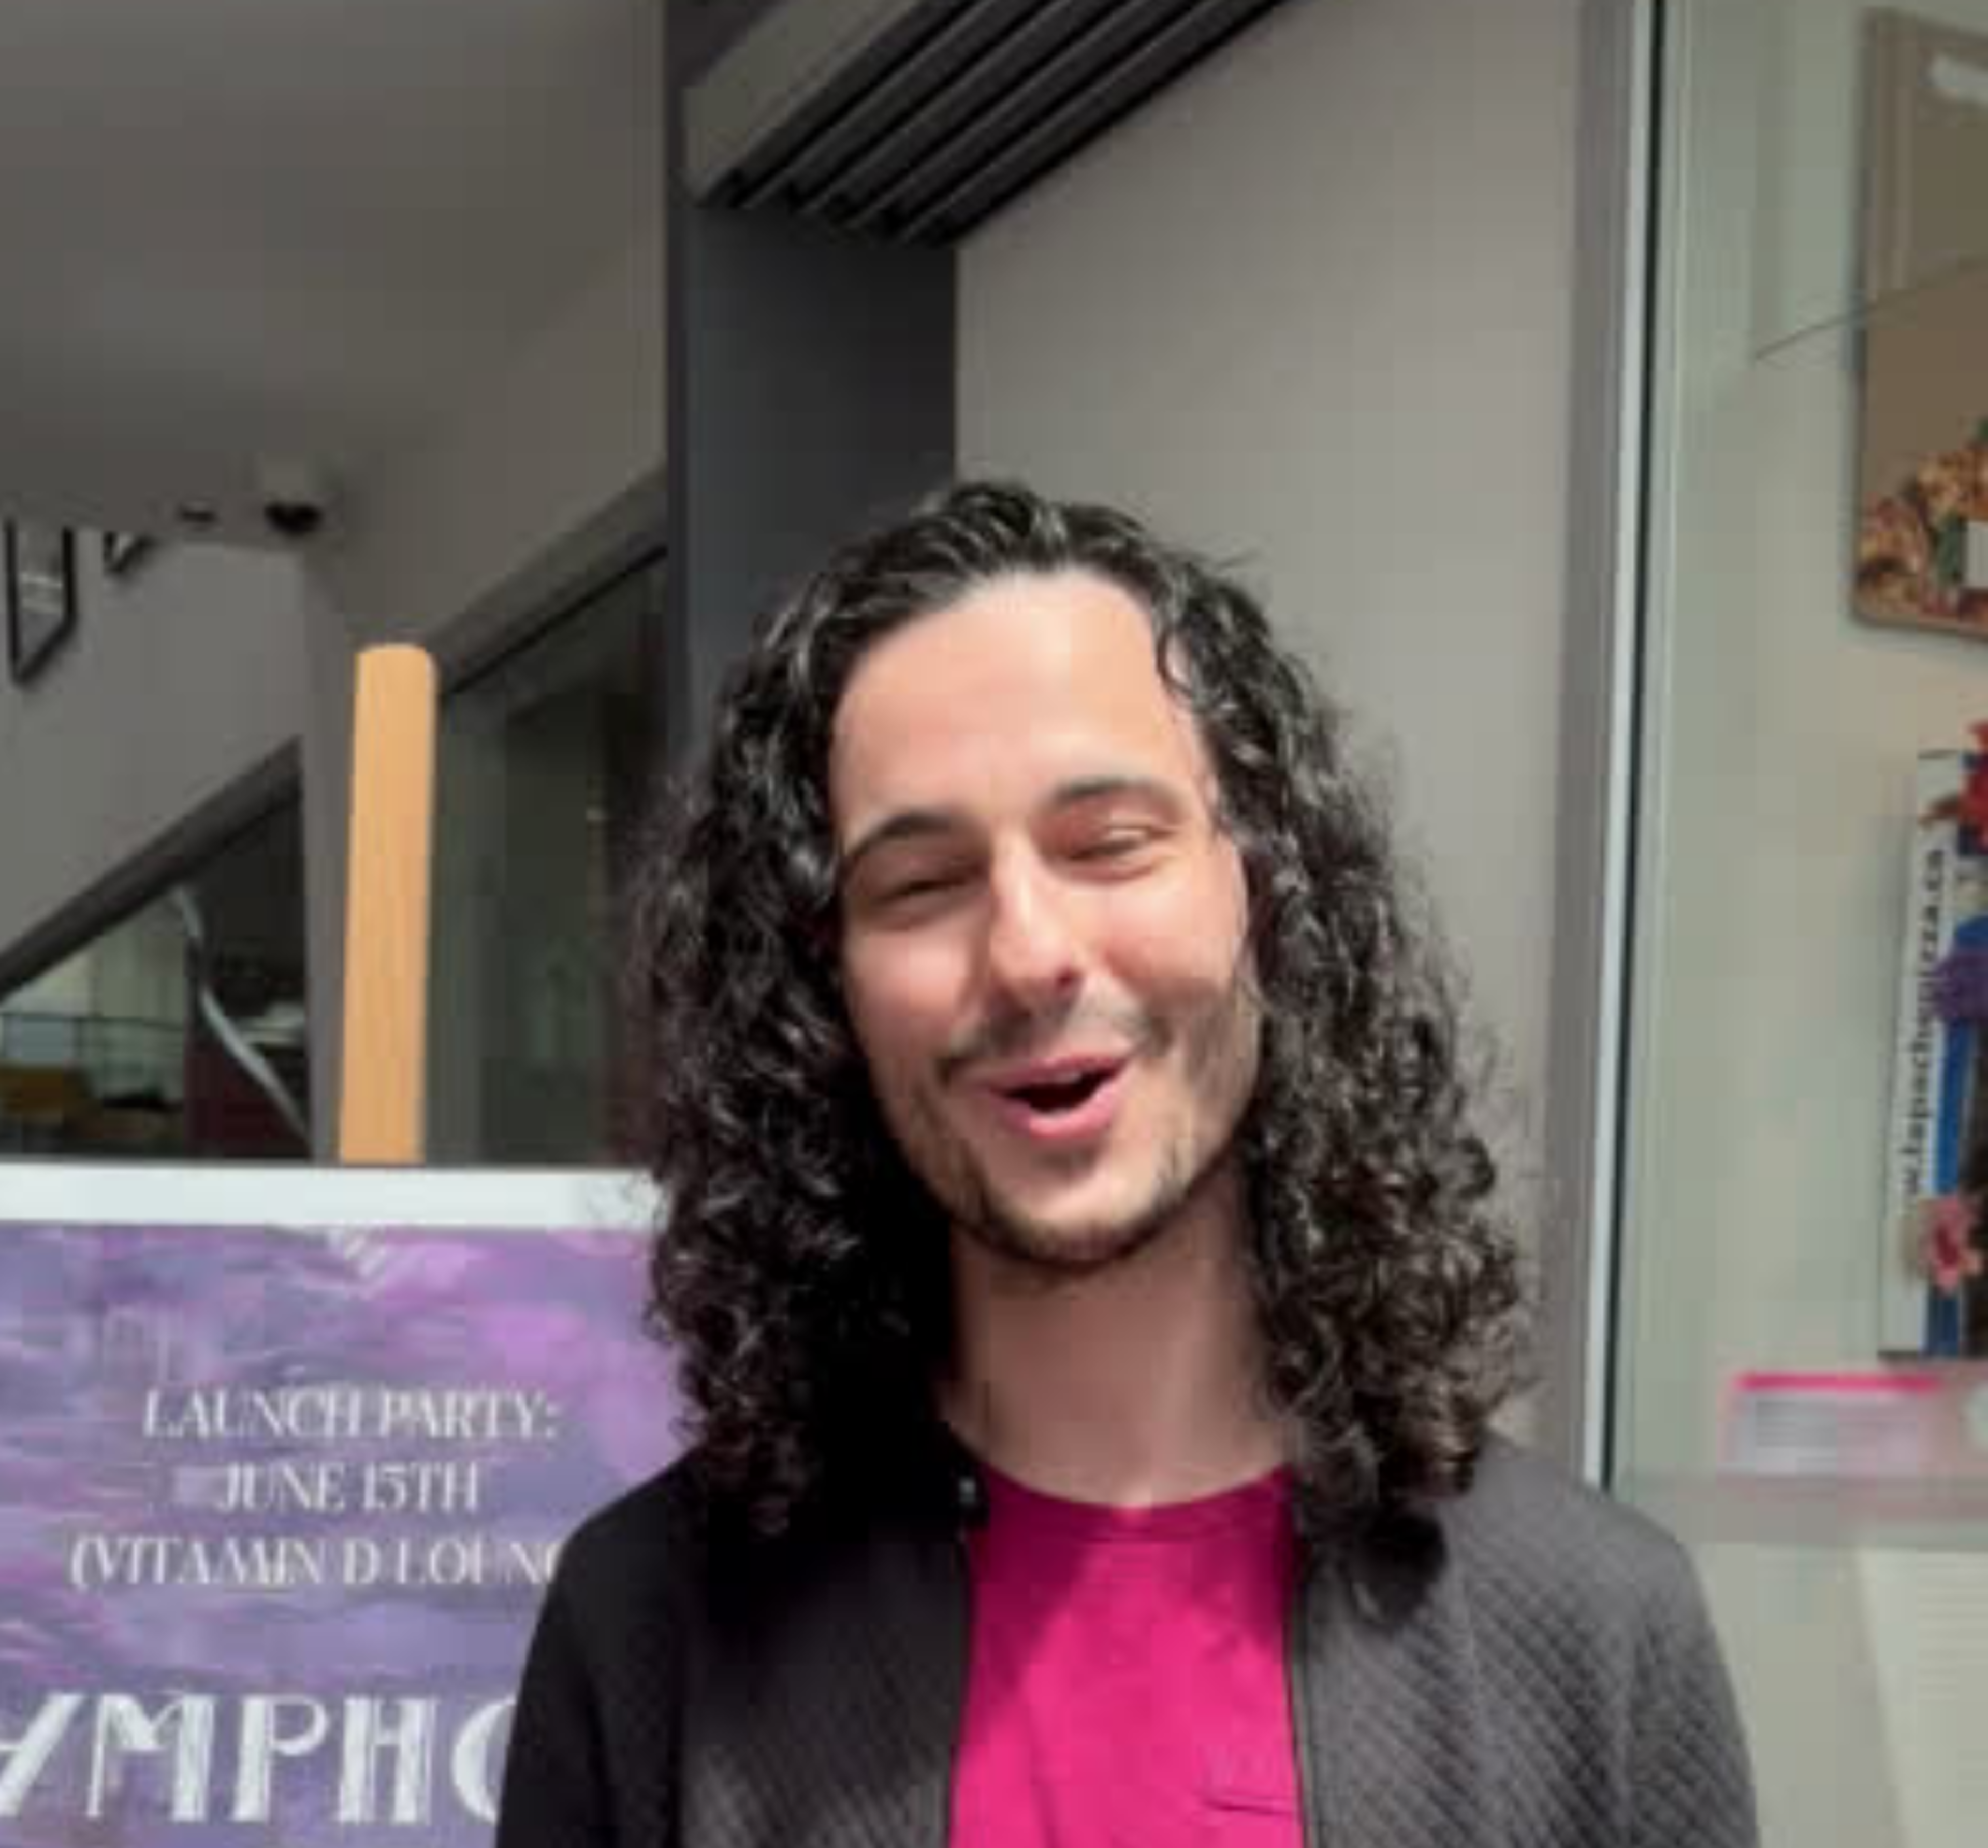 A cheerful man with long curly hair presenting a signboard for a launch party event.